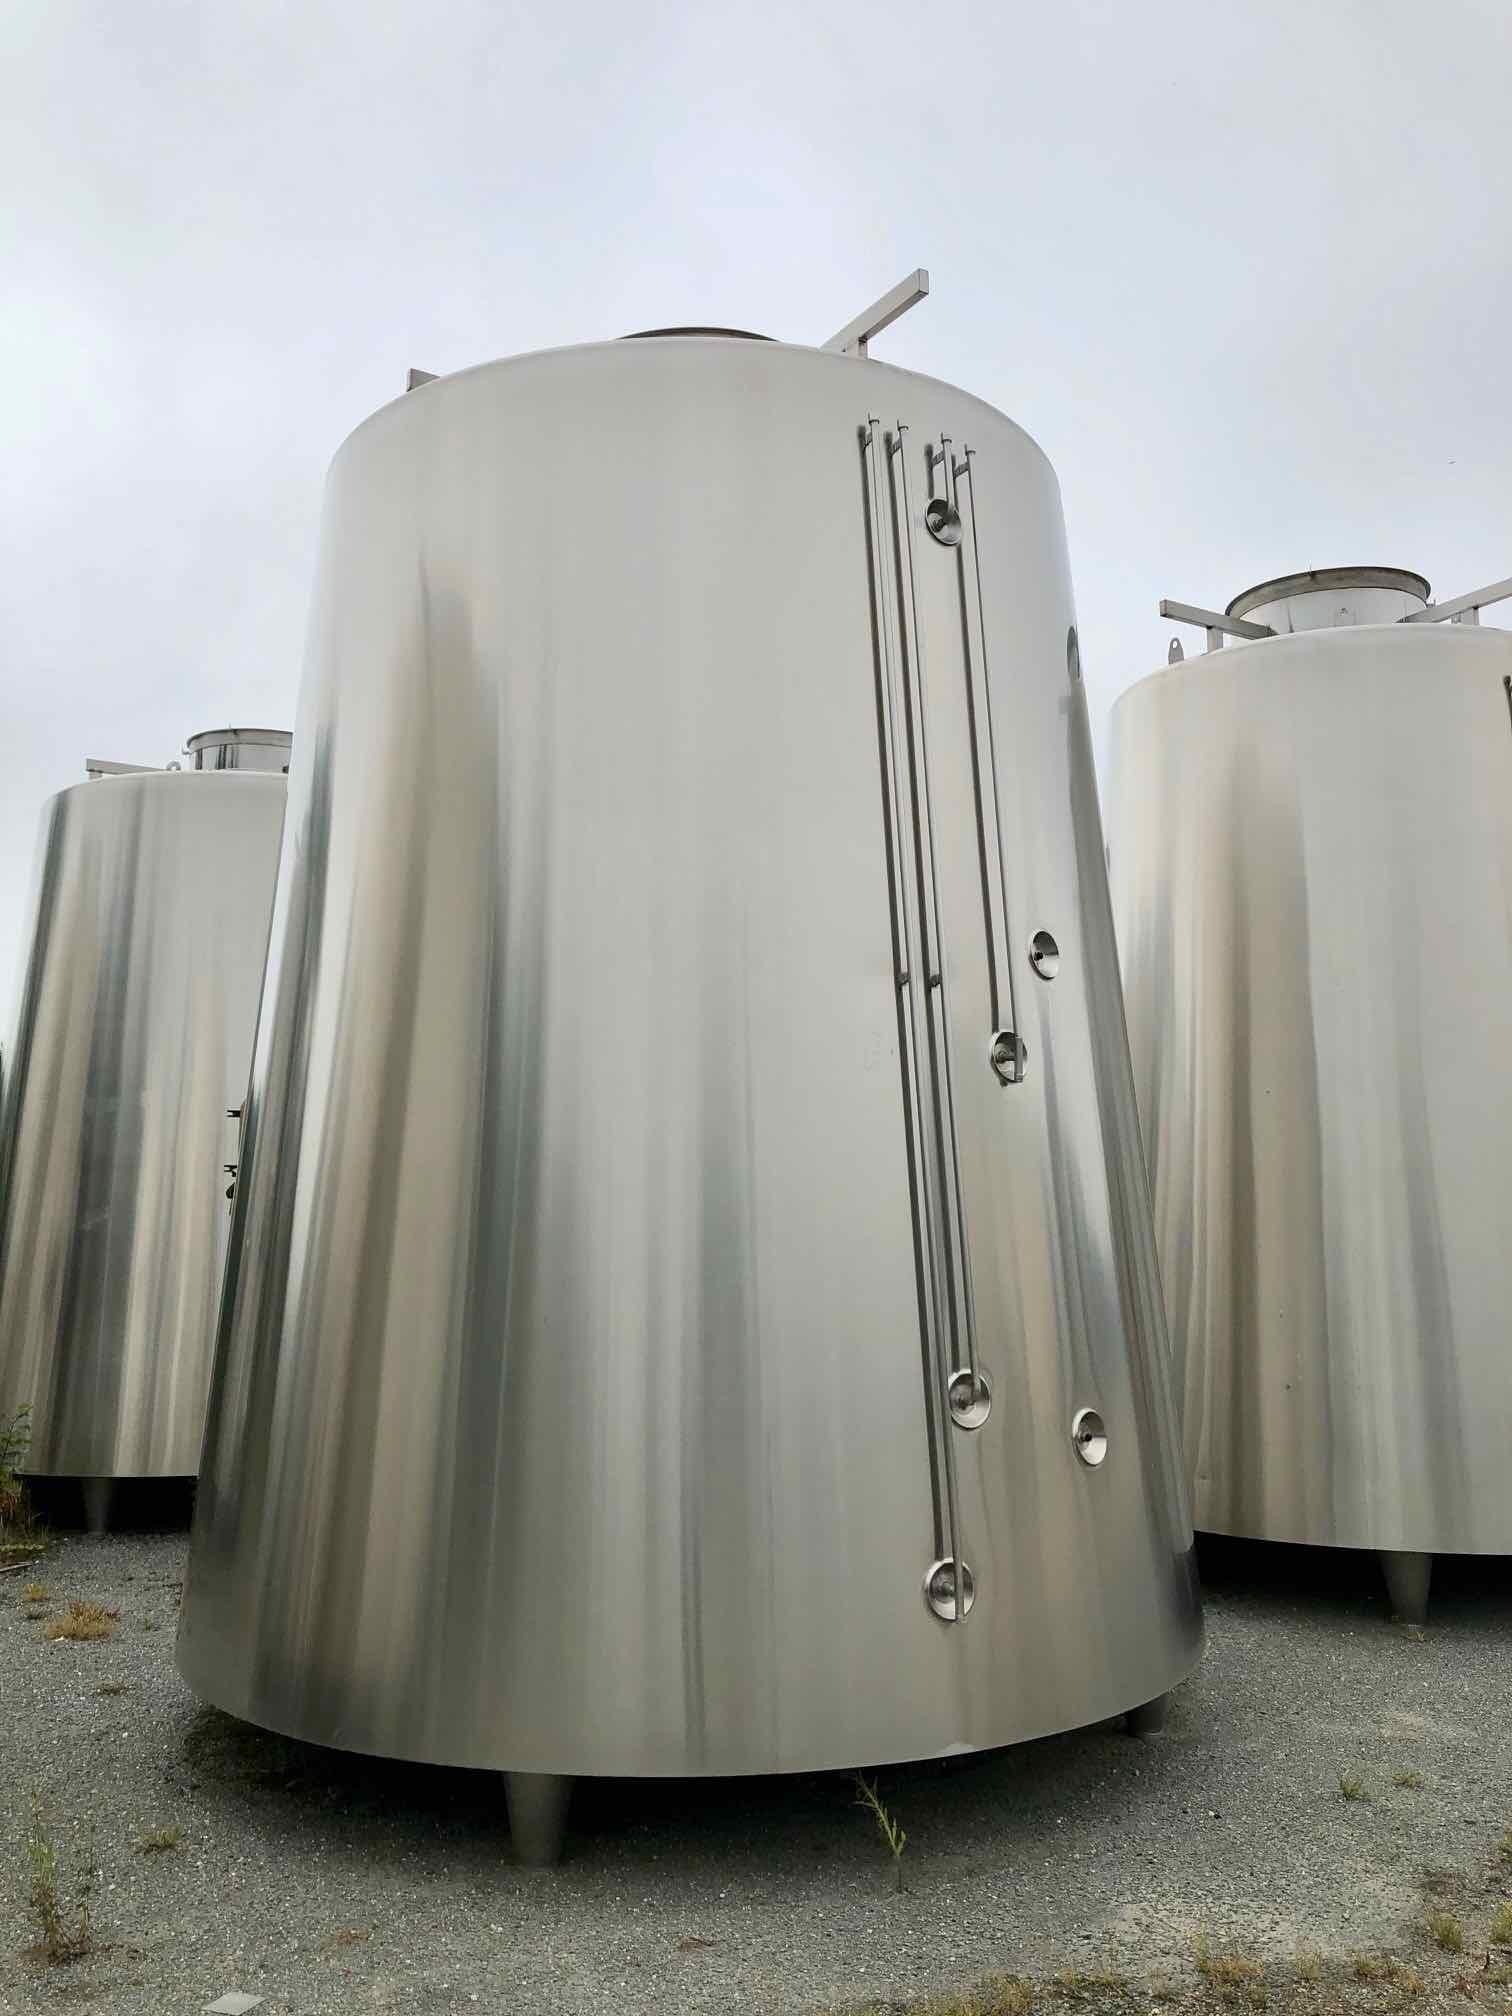 Stainless steel tank 304 L - isolated tronconics - Compartmentalized and shell circuit